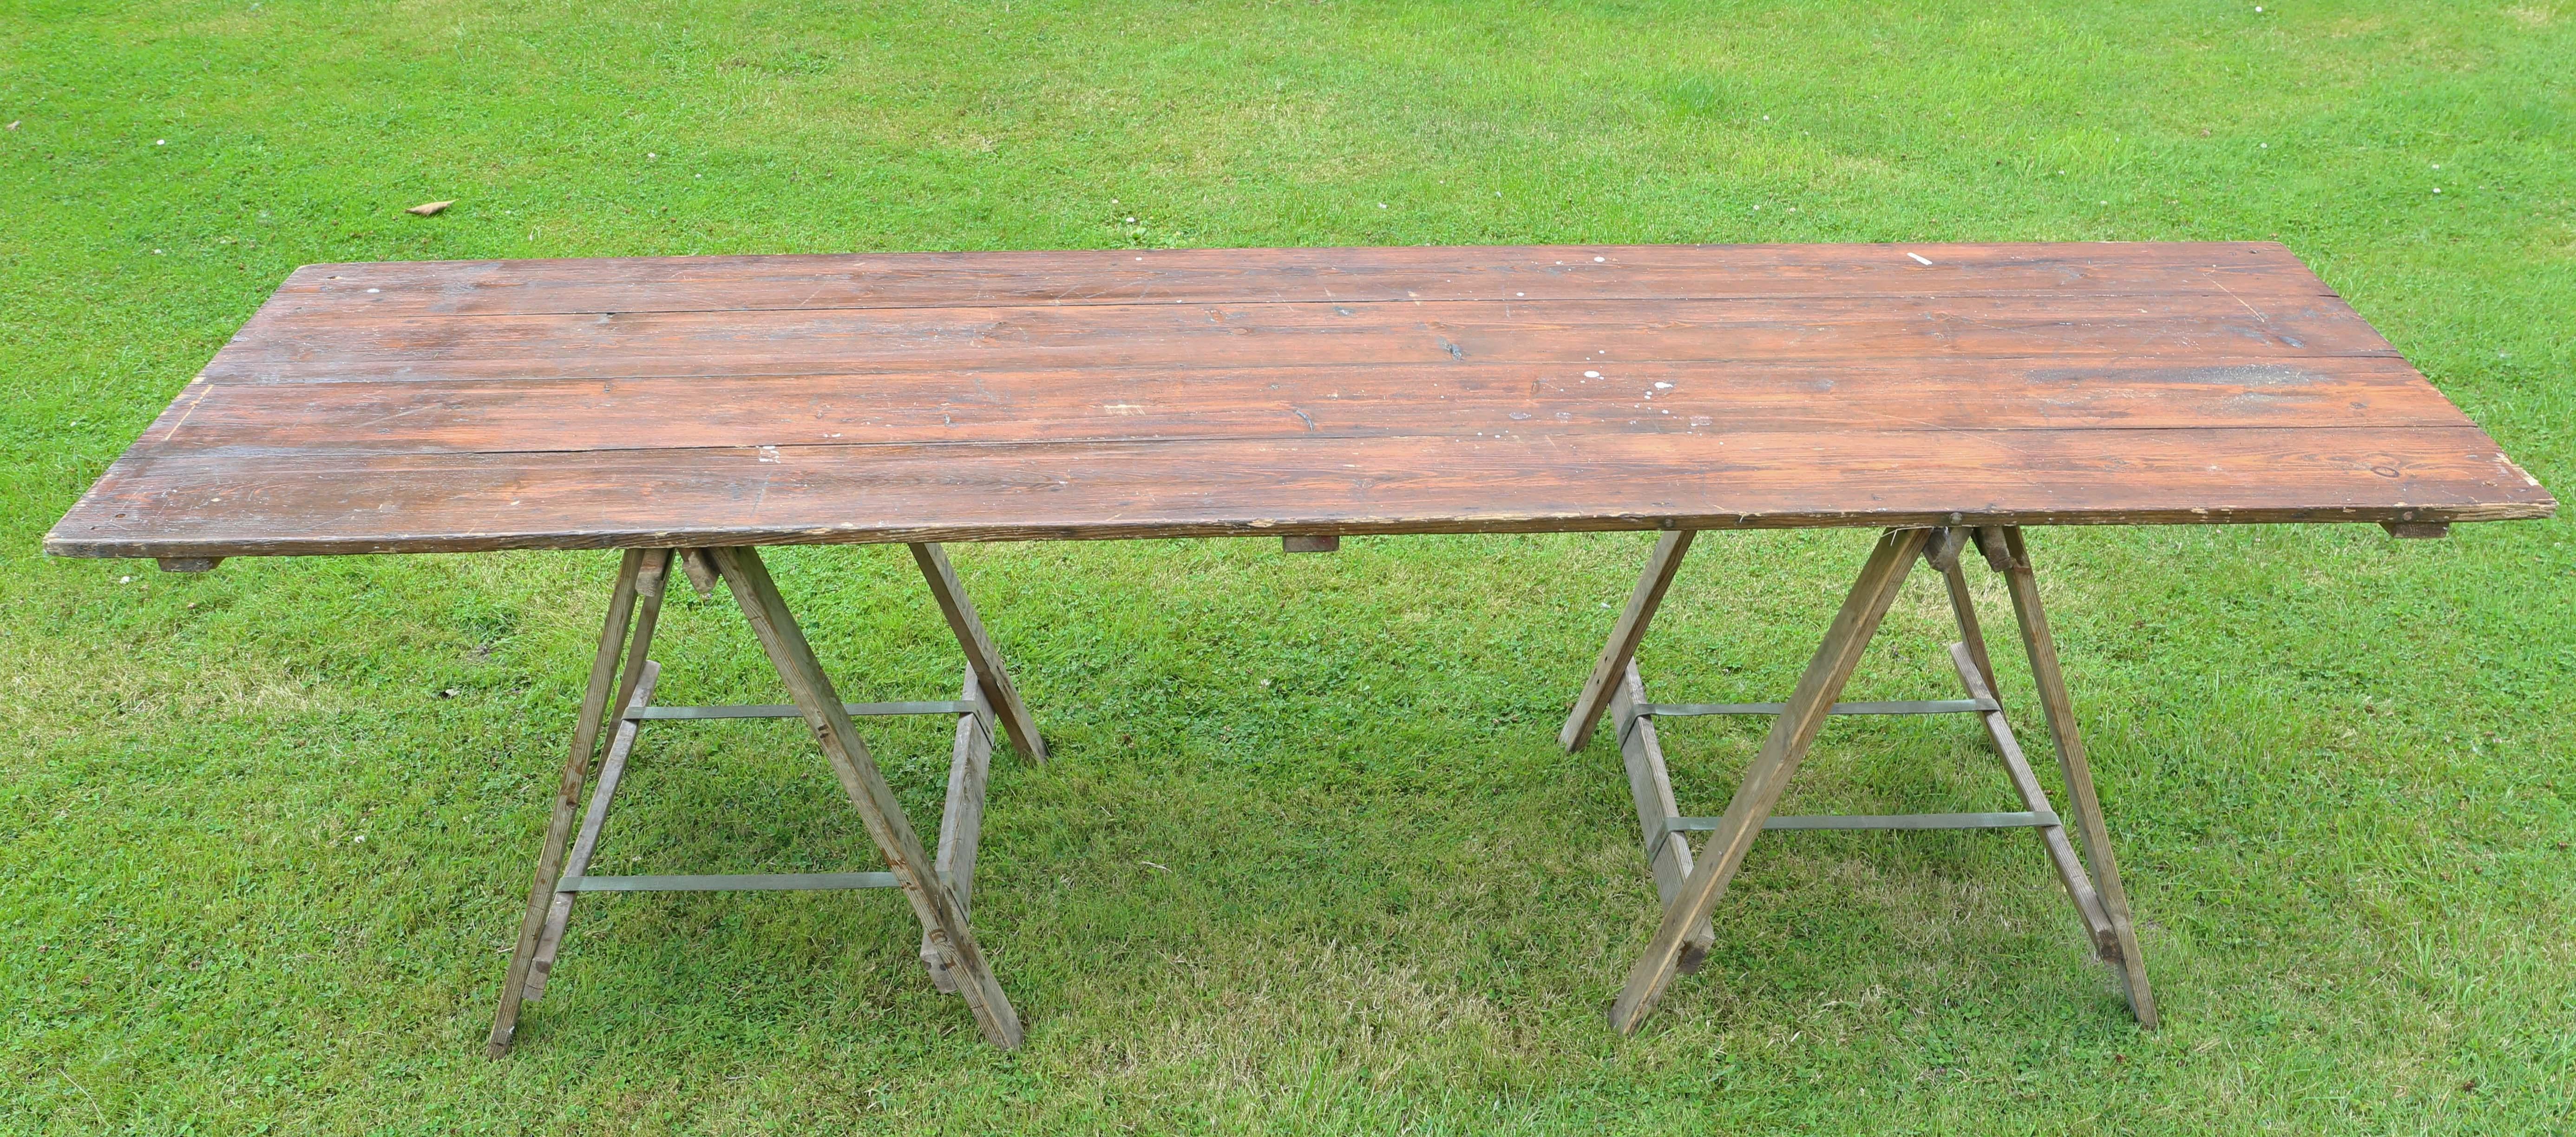 Vintage refectory trestle kitchen garden dining table mid 20th Century 8' In Distressed Condition For Sale In Wisbech, Cambridgeshire